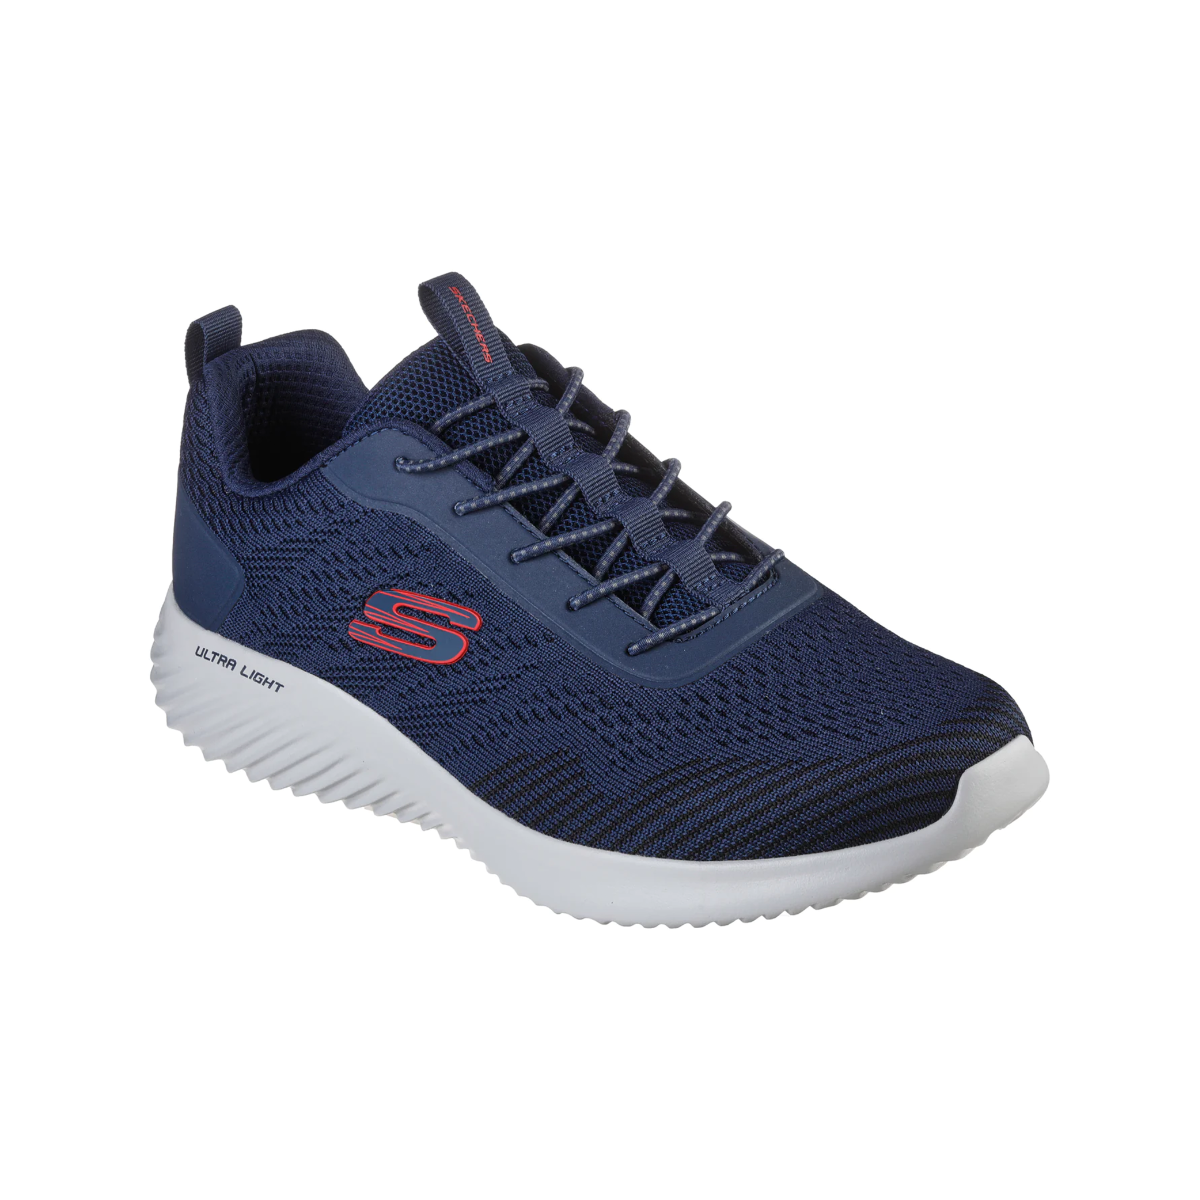 Skechers Sports Bounder Intread Shoes For Men, Navy